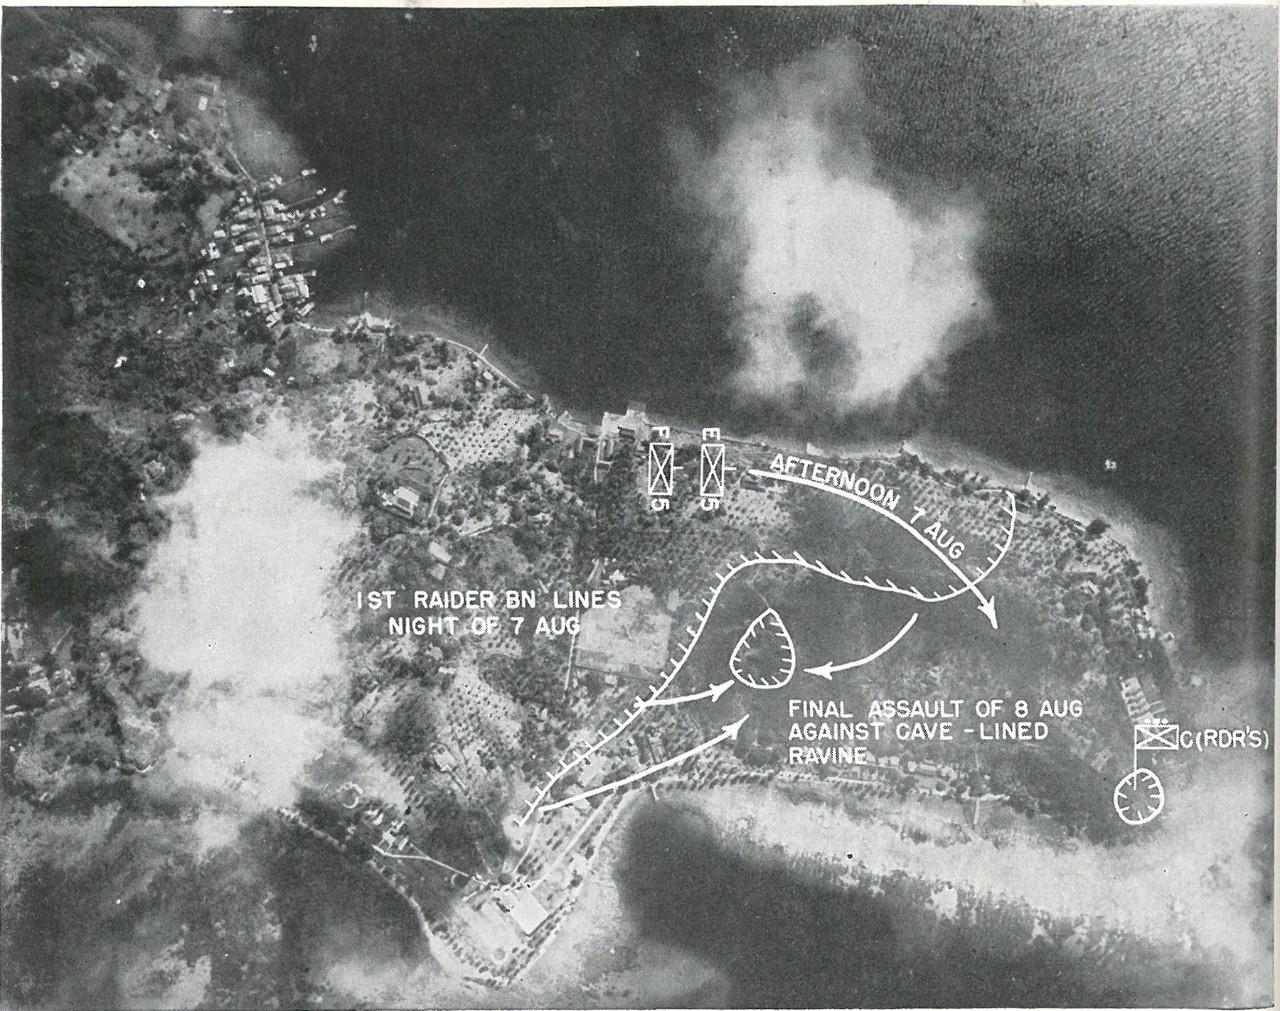 FINAL ASSAULTS ON TULAGI were delivered by elements of 1st Raider Battalion and 2d Battalion, 5th Marines, as shown on overprint. photograph was taken by Navy carrier-planes during strike of 4 May.